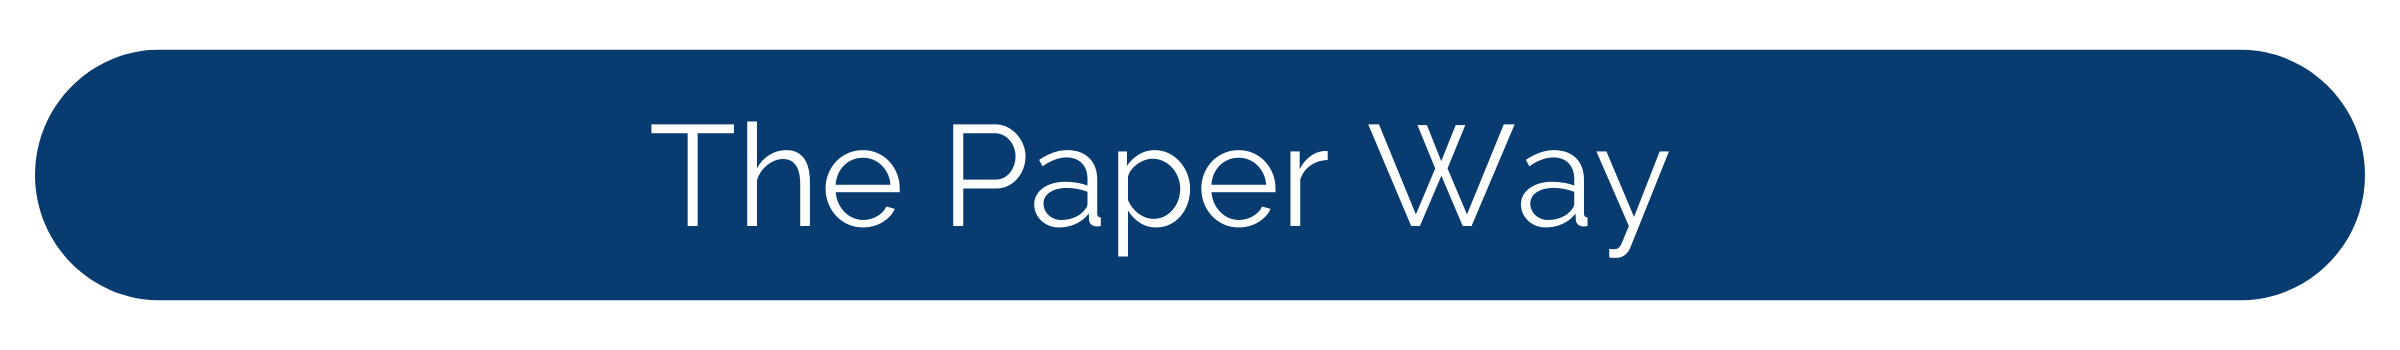 The Paper Way Tax Filing